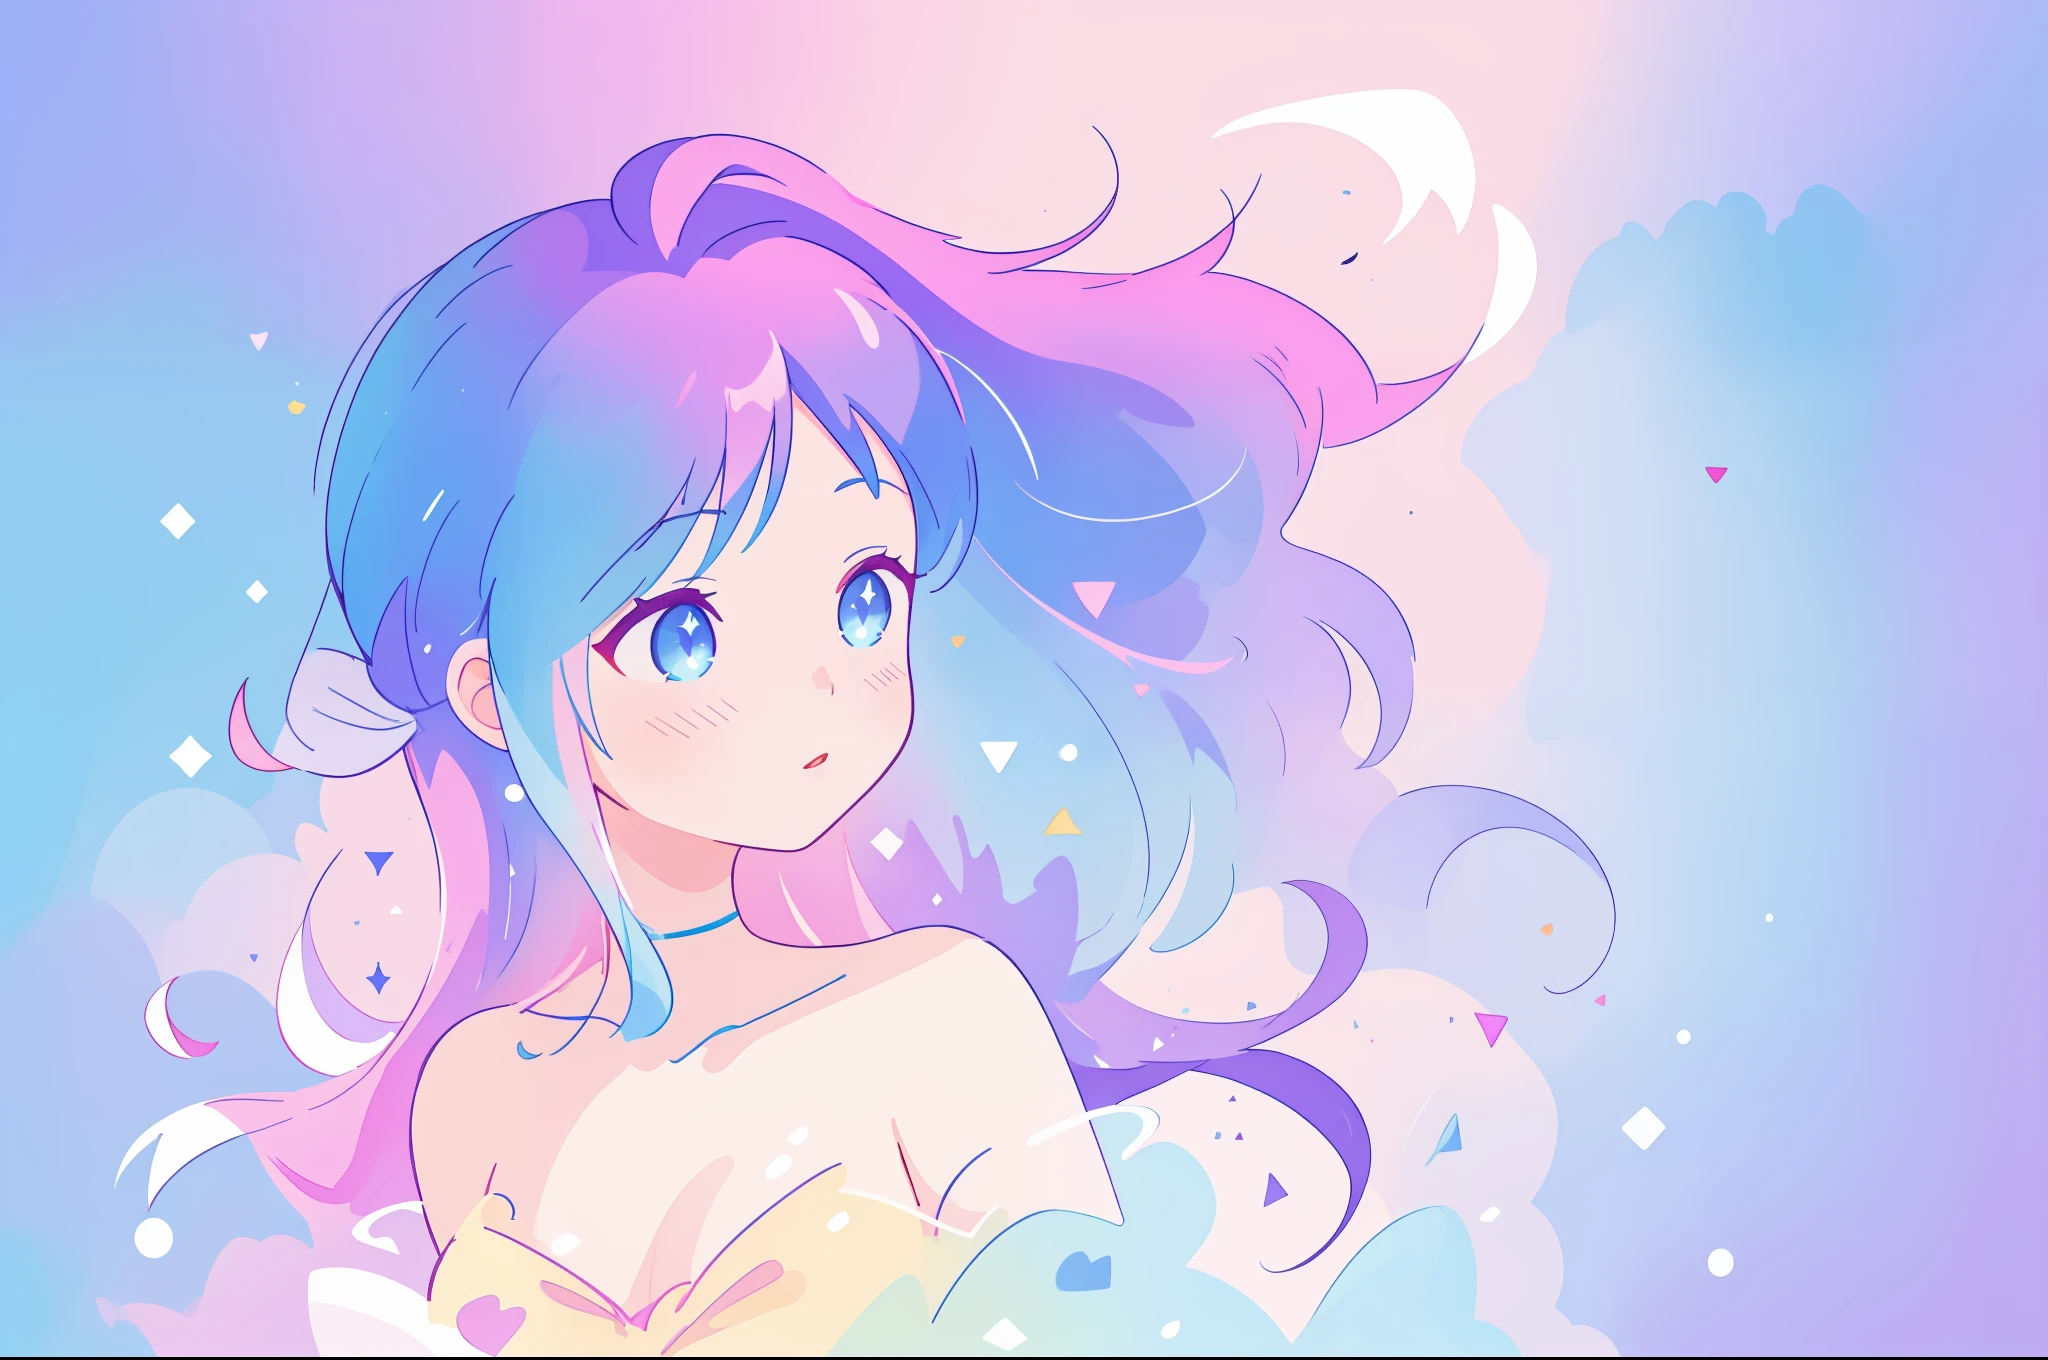 beautiful anime girl, portrait, vibrant pastel colors, (colorful), magical lights, long flowing colorful hair, inspired by Glen Keane, inspired by Lois van Baarle, disney art style, by Lois van Baarle, glowing aura around her, by Glen Keane, jen bartel, glowing lights! digital painting, flowing glowing hair, glowing flowing hair, beautiful digital illustration, fantasia background, whimsical, magical, fantasy, beautiful face, ((masterpiece, best quality)), intricate details, highly detailed, sharp focus, 8k resolution, sparkling detailed eyes, liquid watercolor